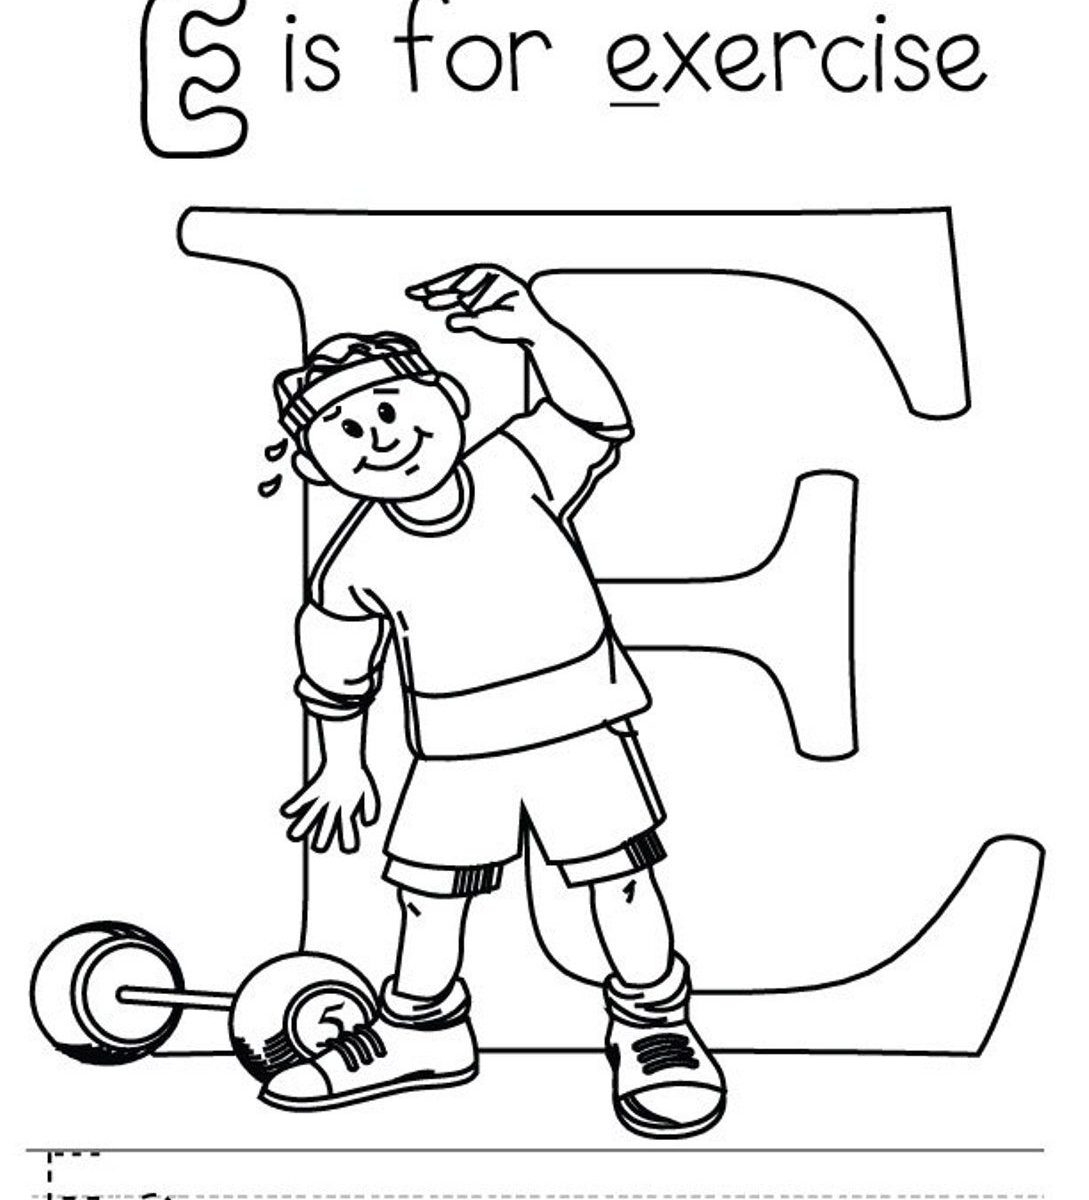 Exercise Coloring Pages - Coloring Home